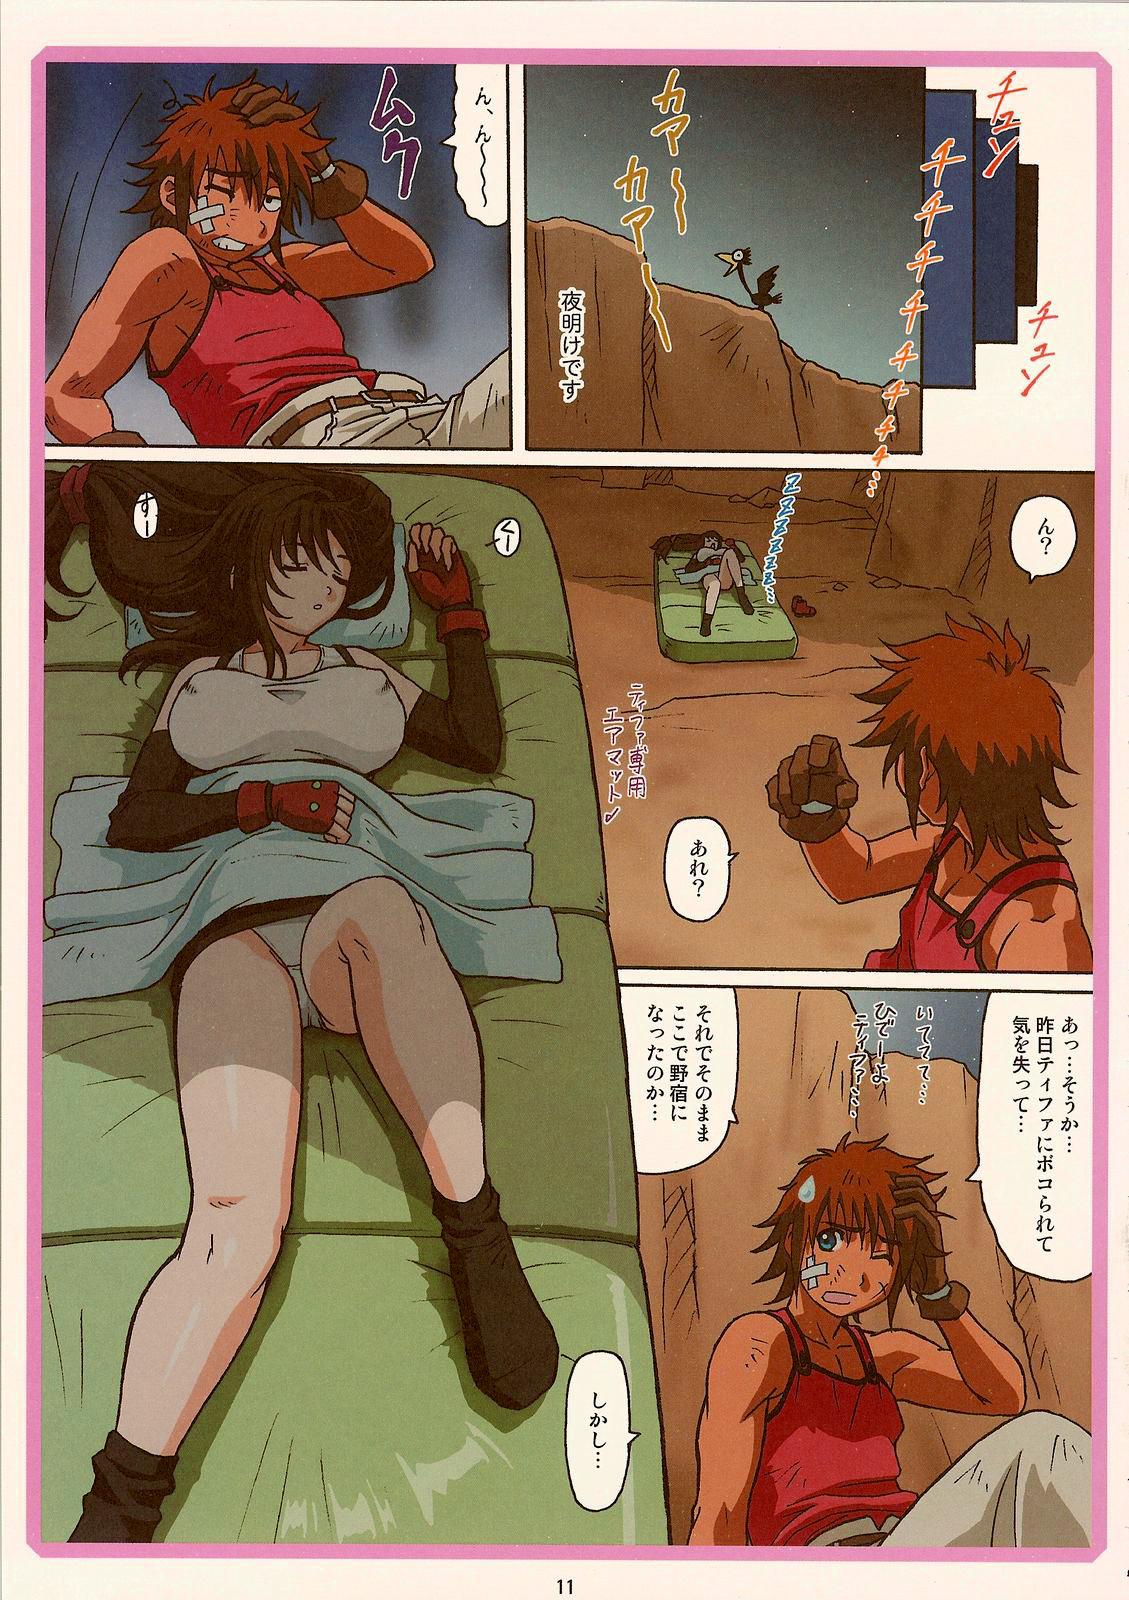 Orgy Tifa W cup - Final fantasy vii Dominate - Page 10